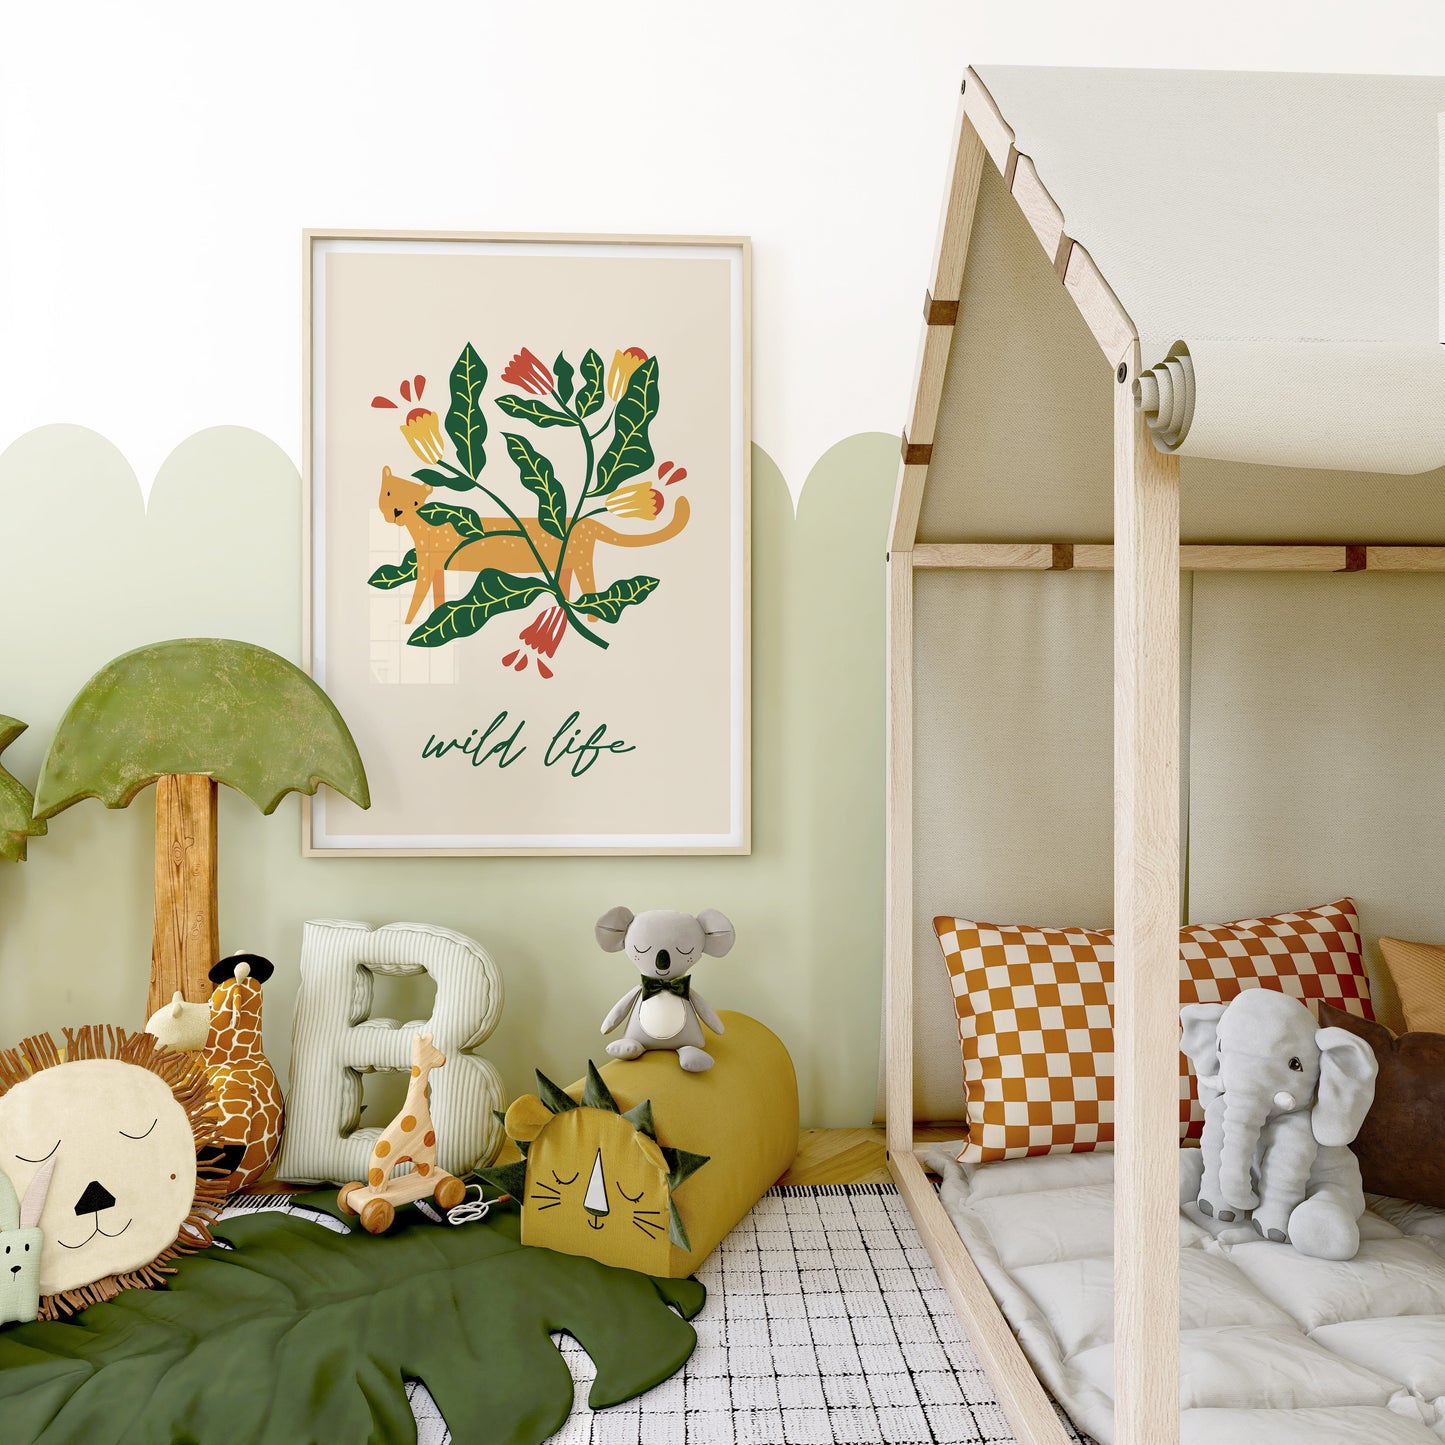 a child's bedroom with a canopy bed and stuffed animals